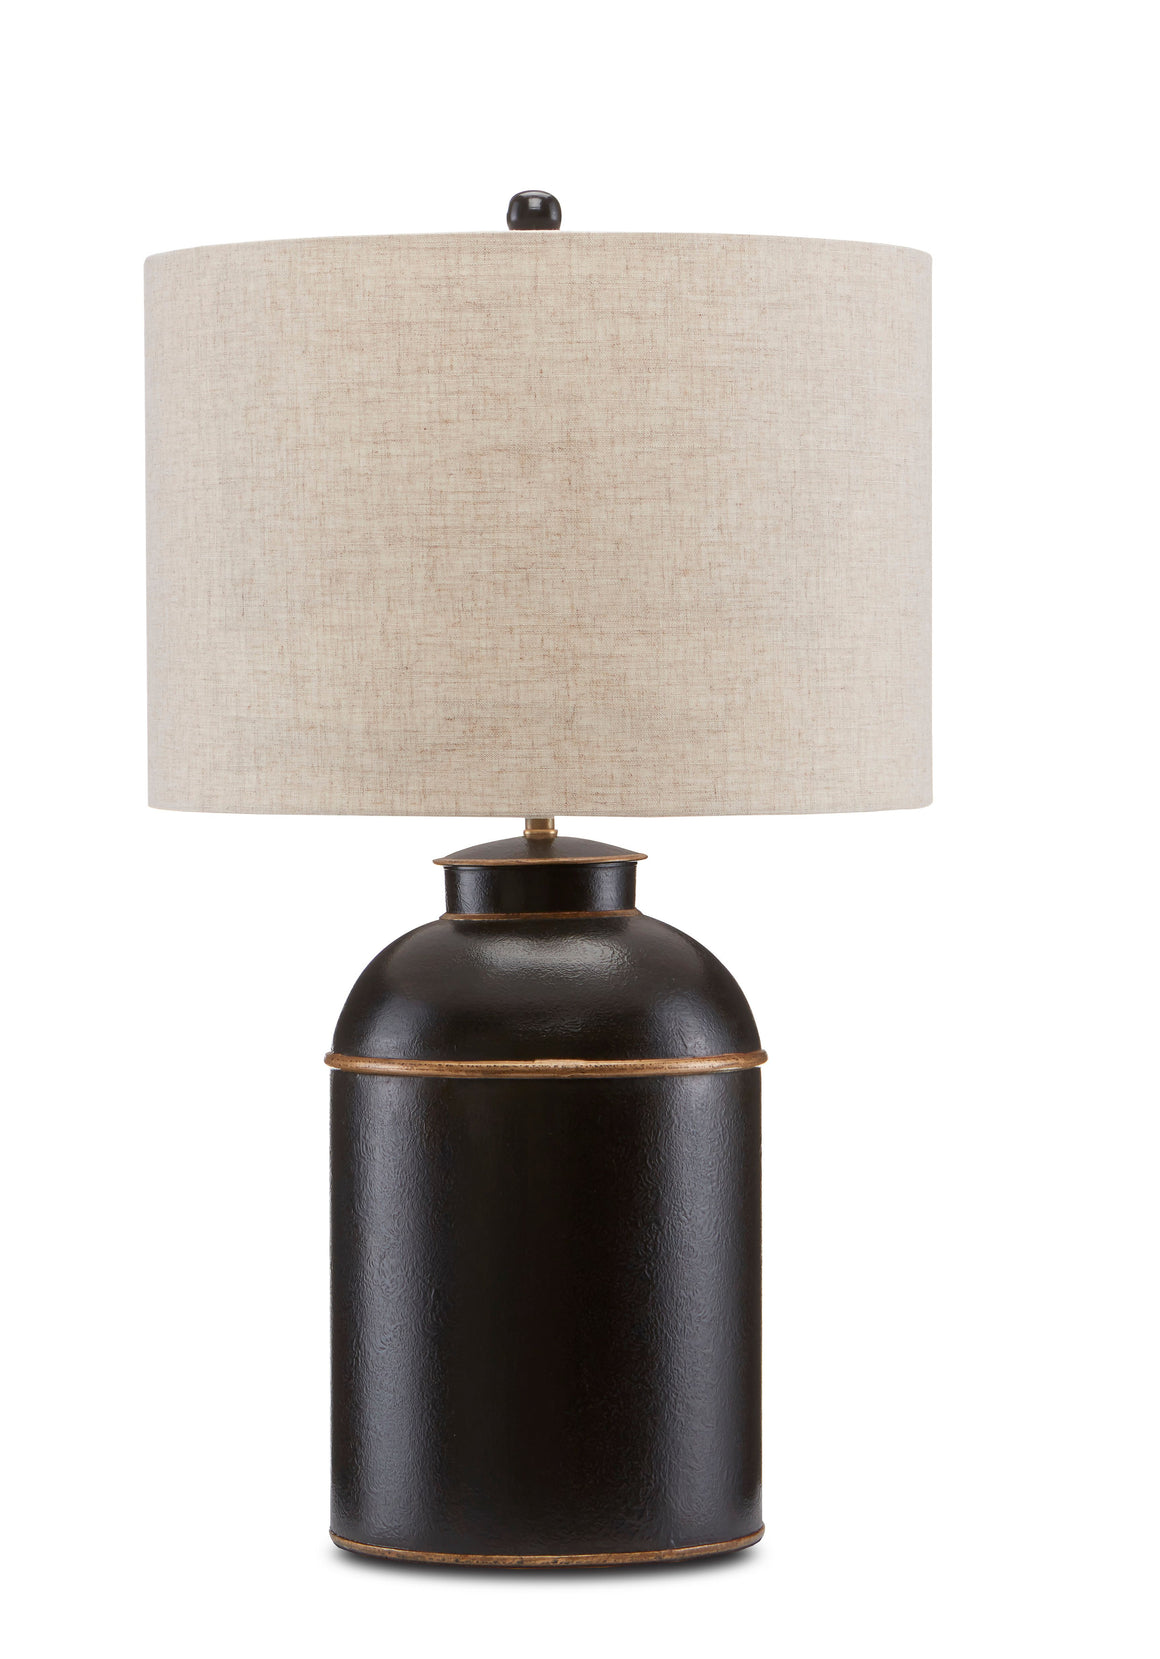 Currey and Company London Black Table Lamp - Black/Gold